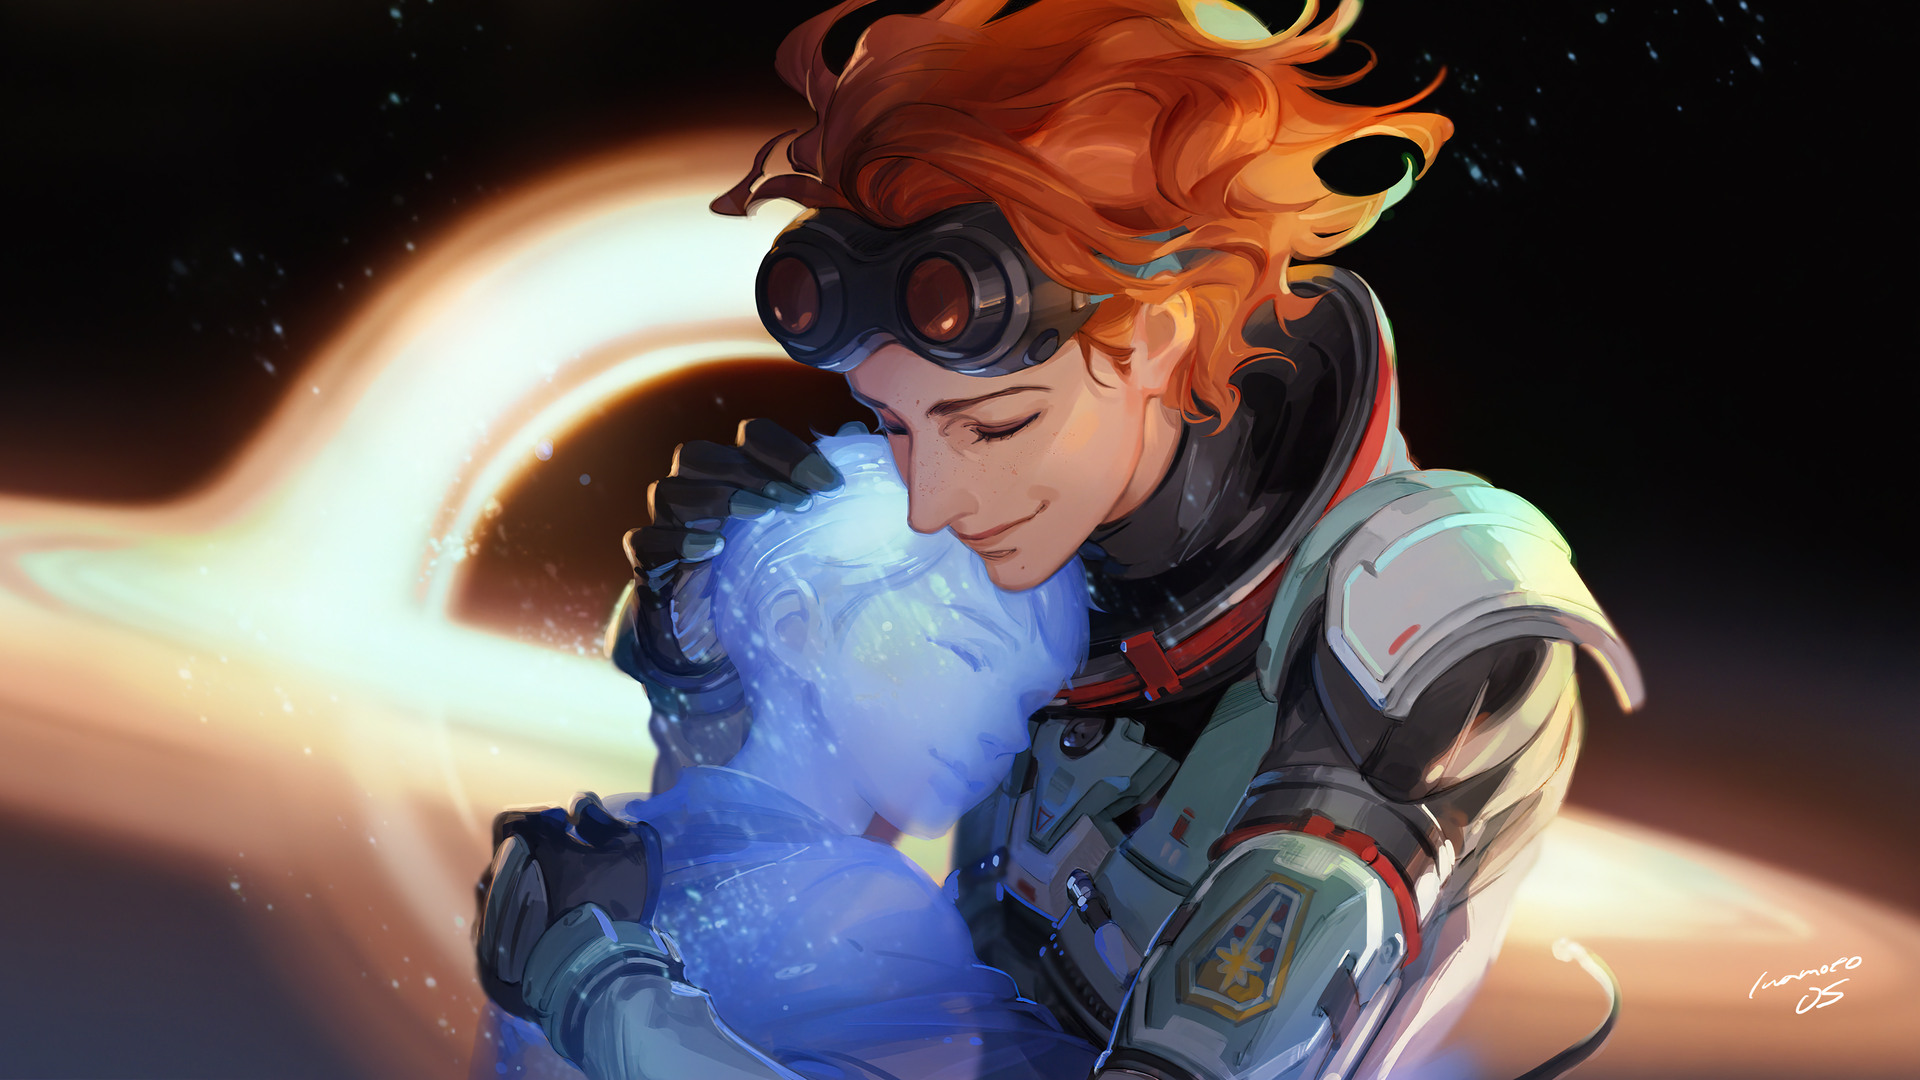 510+ Apex Legends HD Wallpapers and Backgrounds